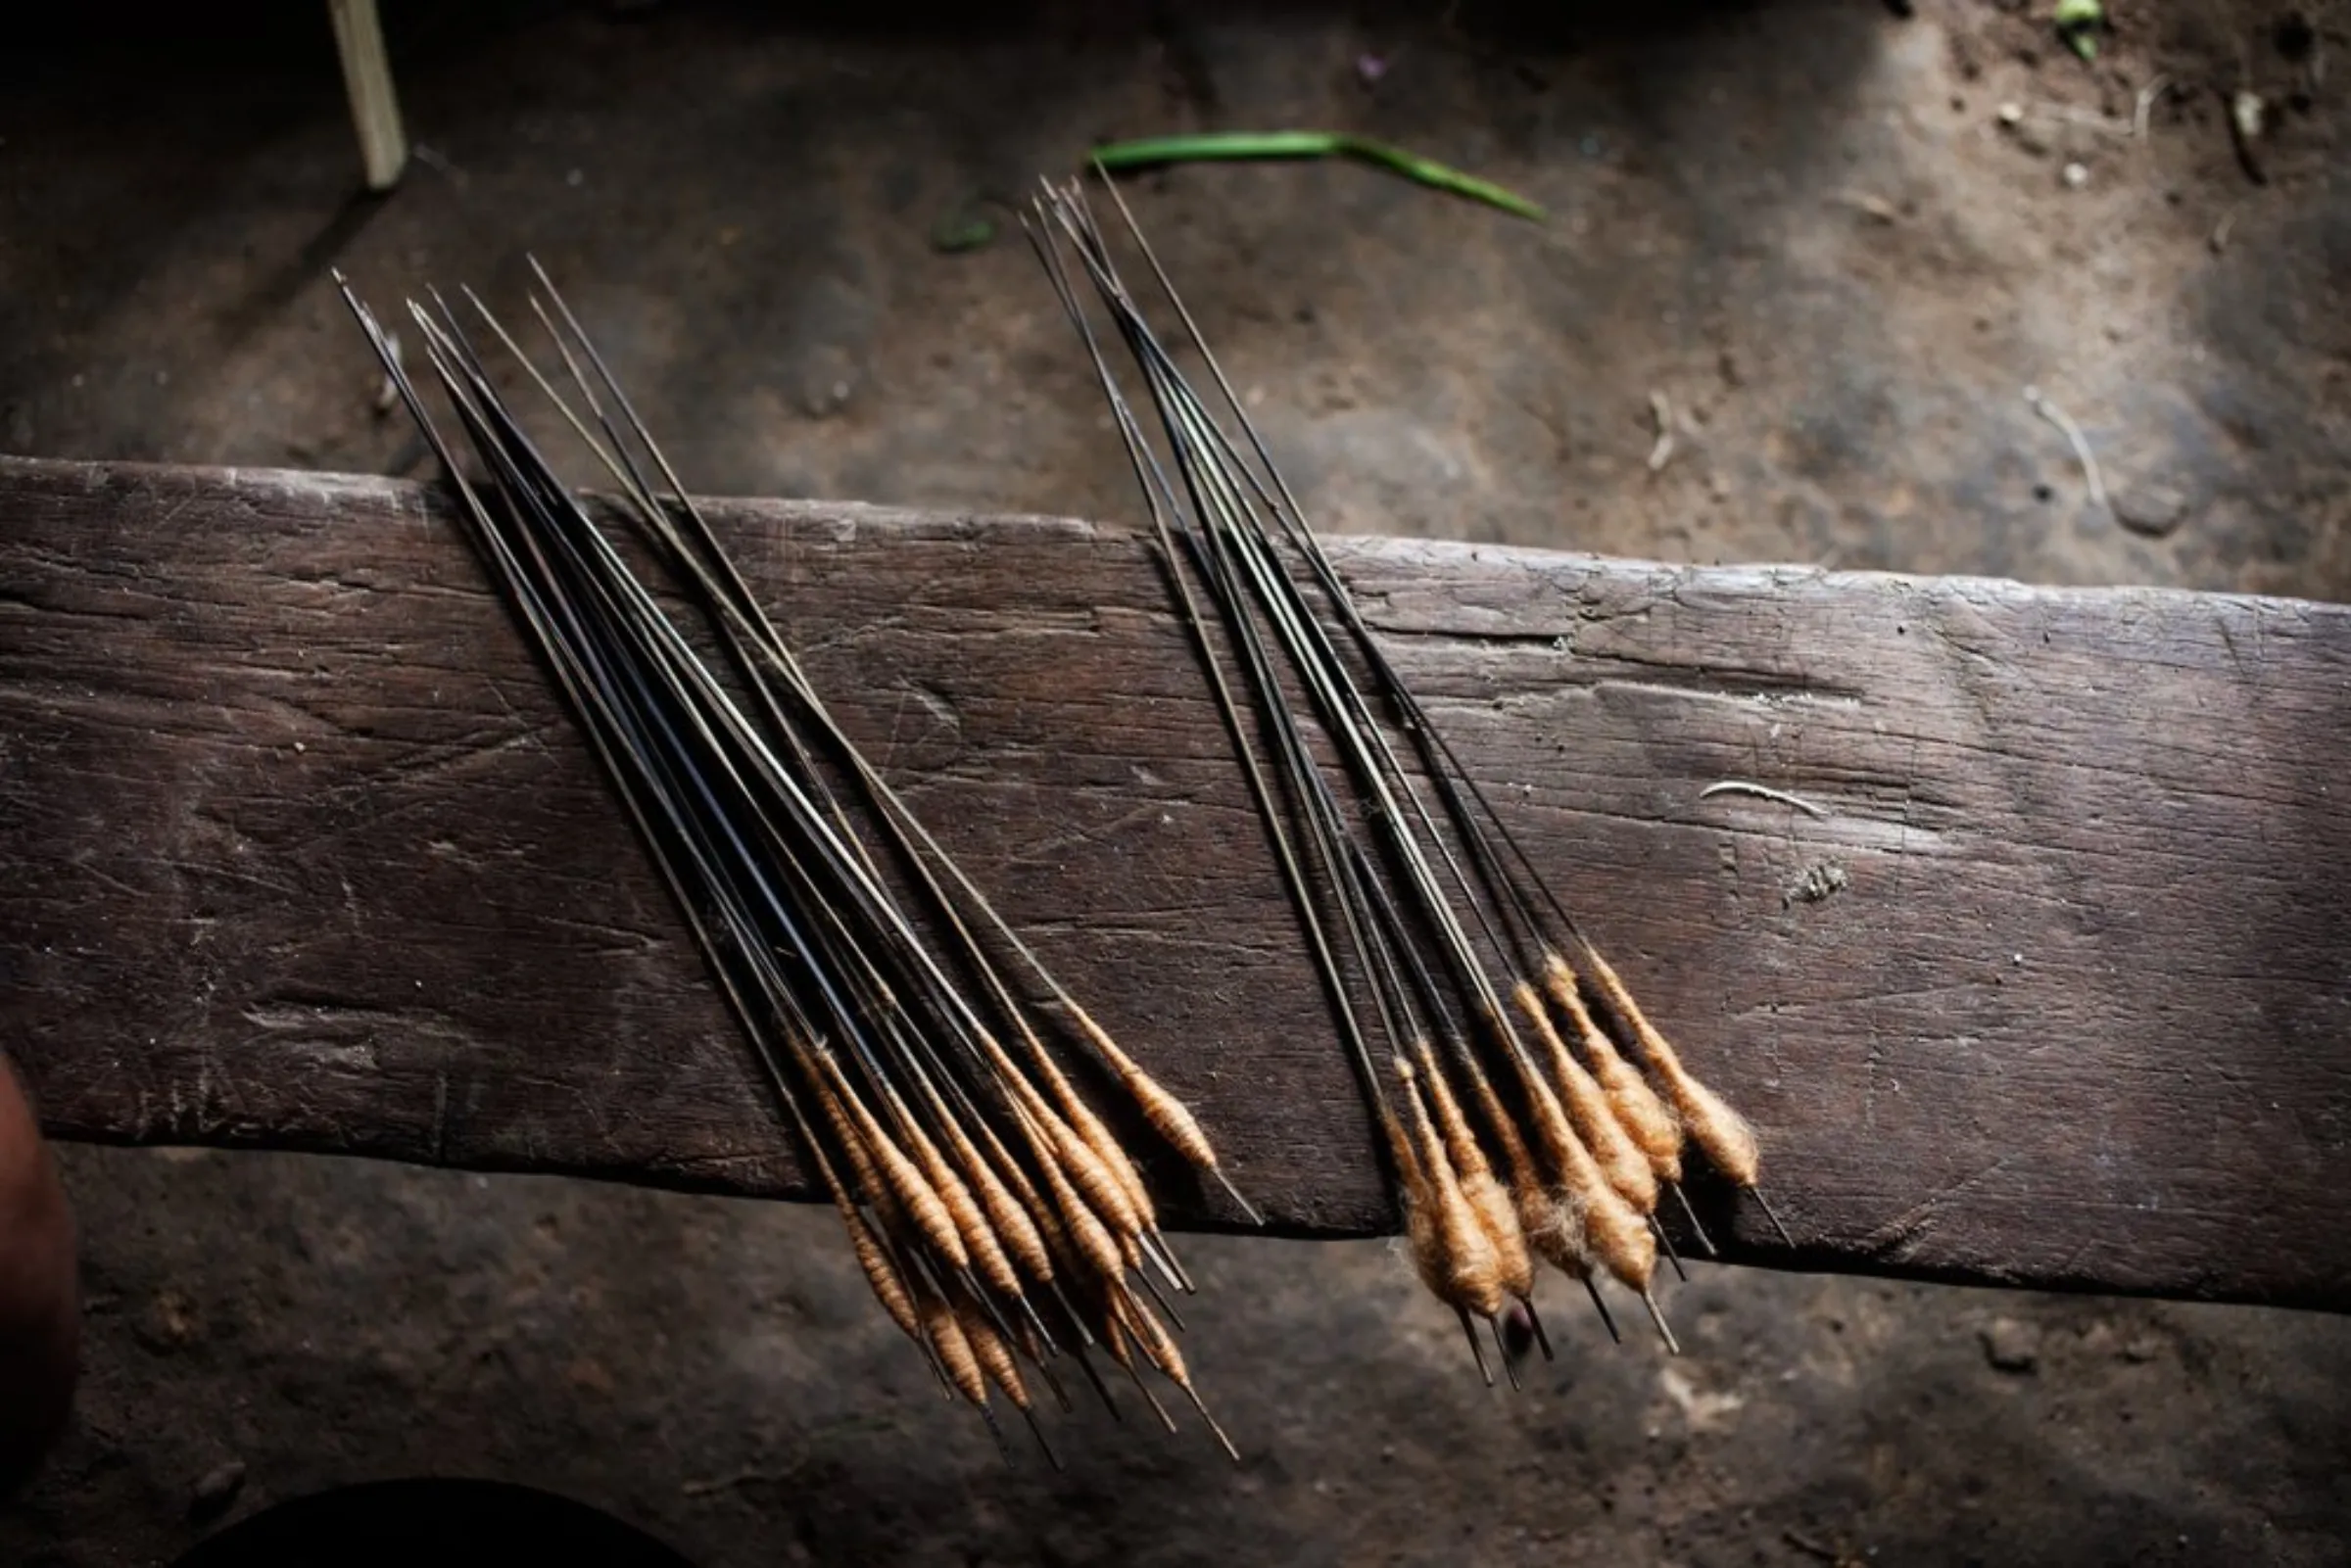 A set of arrows used by riverside indigenous communities in Colombia’s southeast Amazonas province to hunt animals in the forest, December 18, 2021